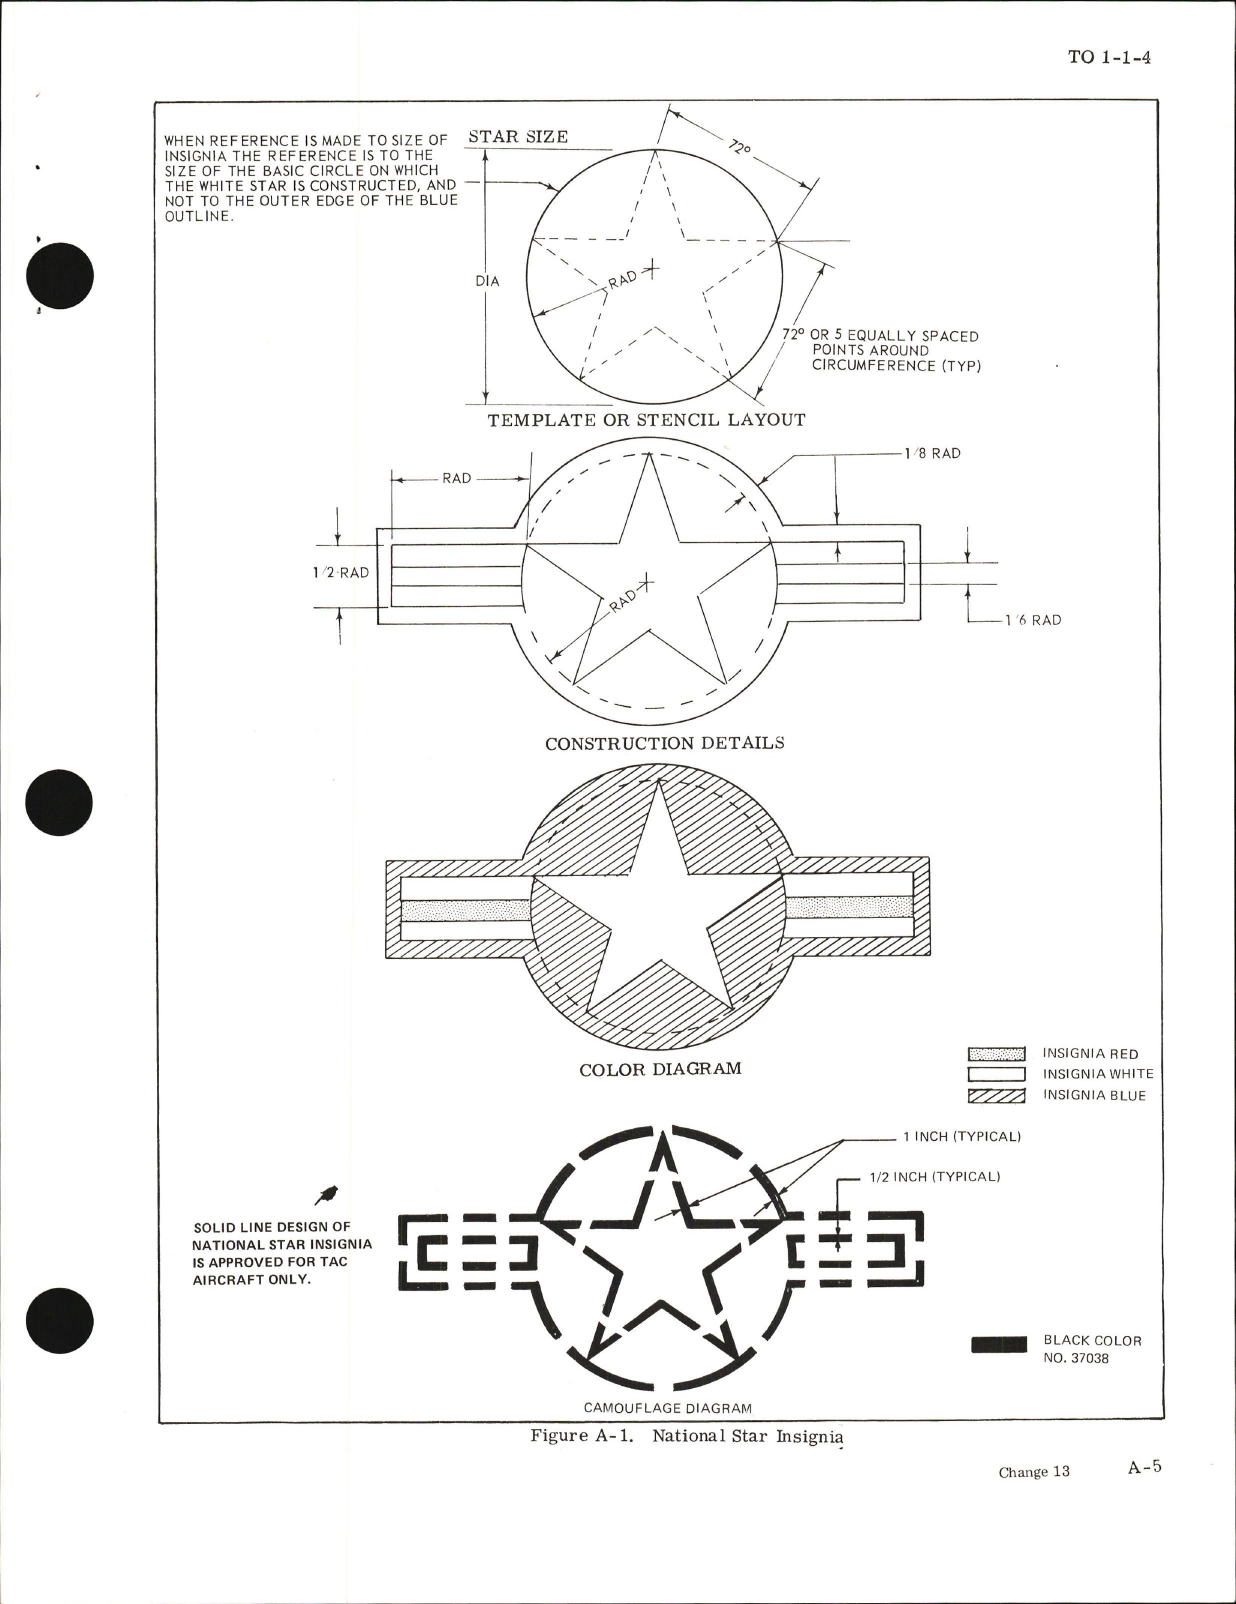 Sample page 7 from AirCorps Library document: Exterior Finishes, Insignia and Markings for USAF Aircraft - Change - 13